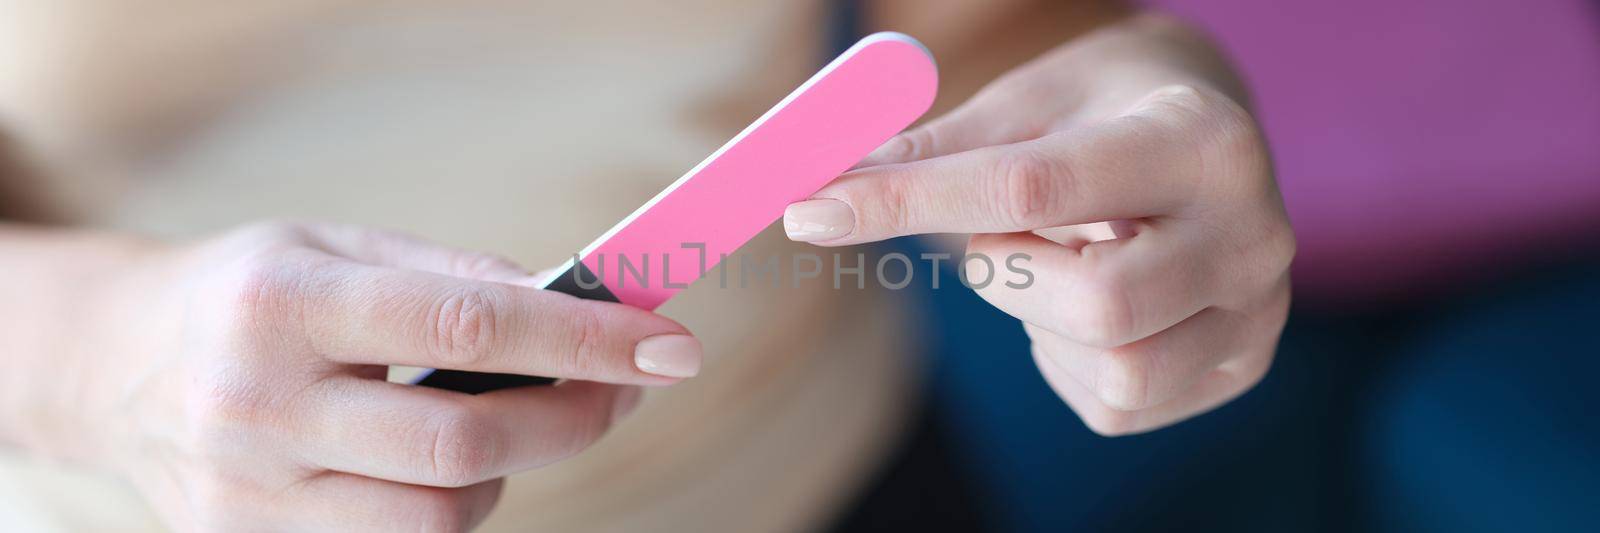 Woman files fingernails with pink nail file. Choosing reliable quality nail file concept